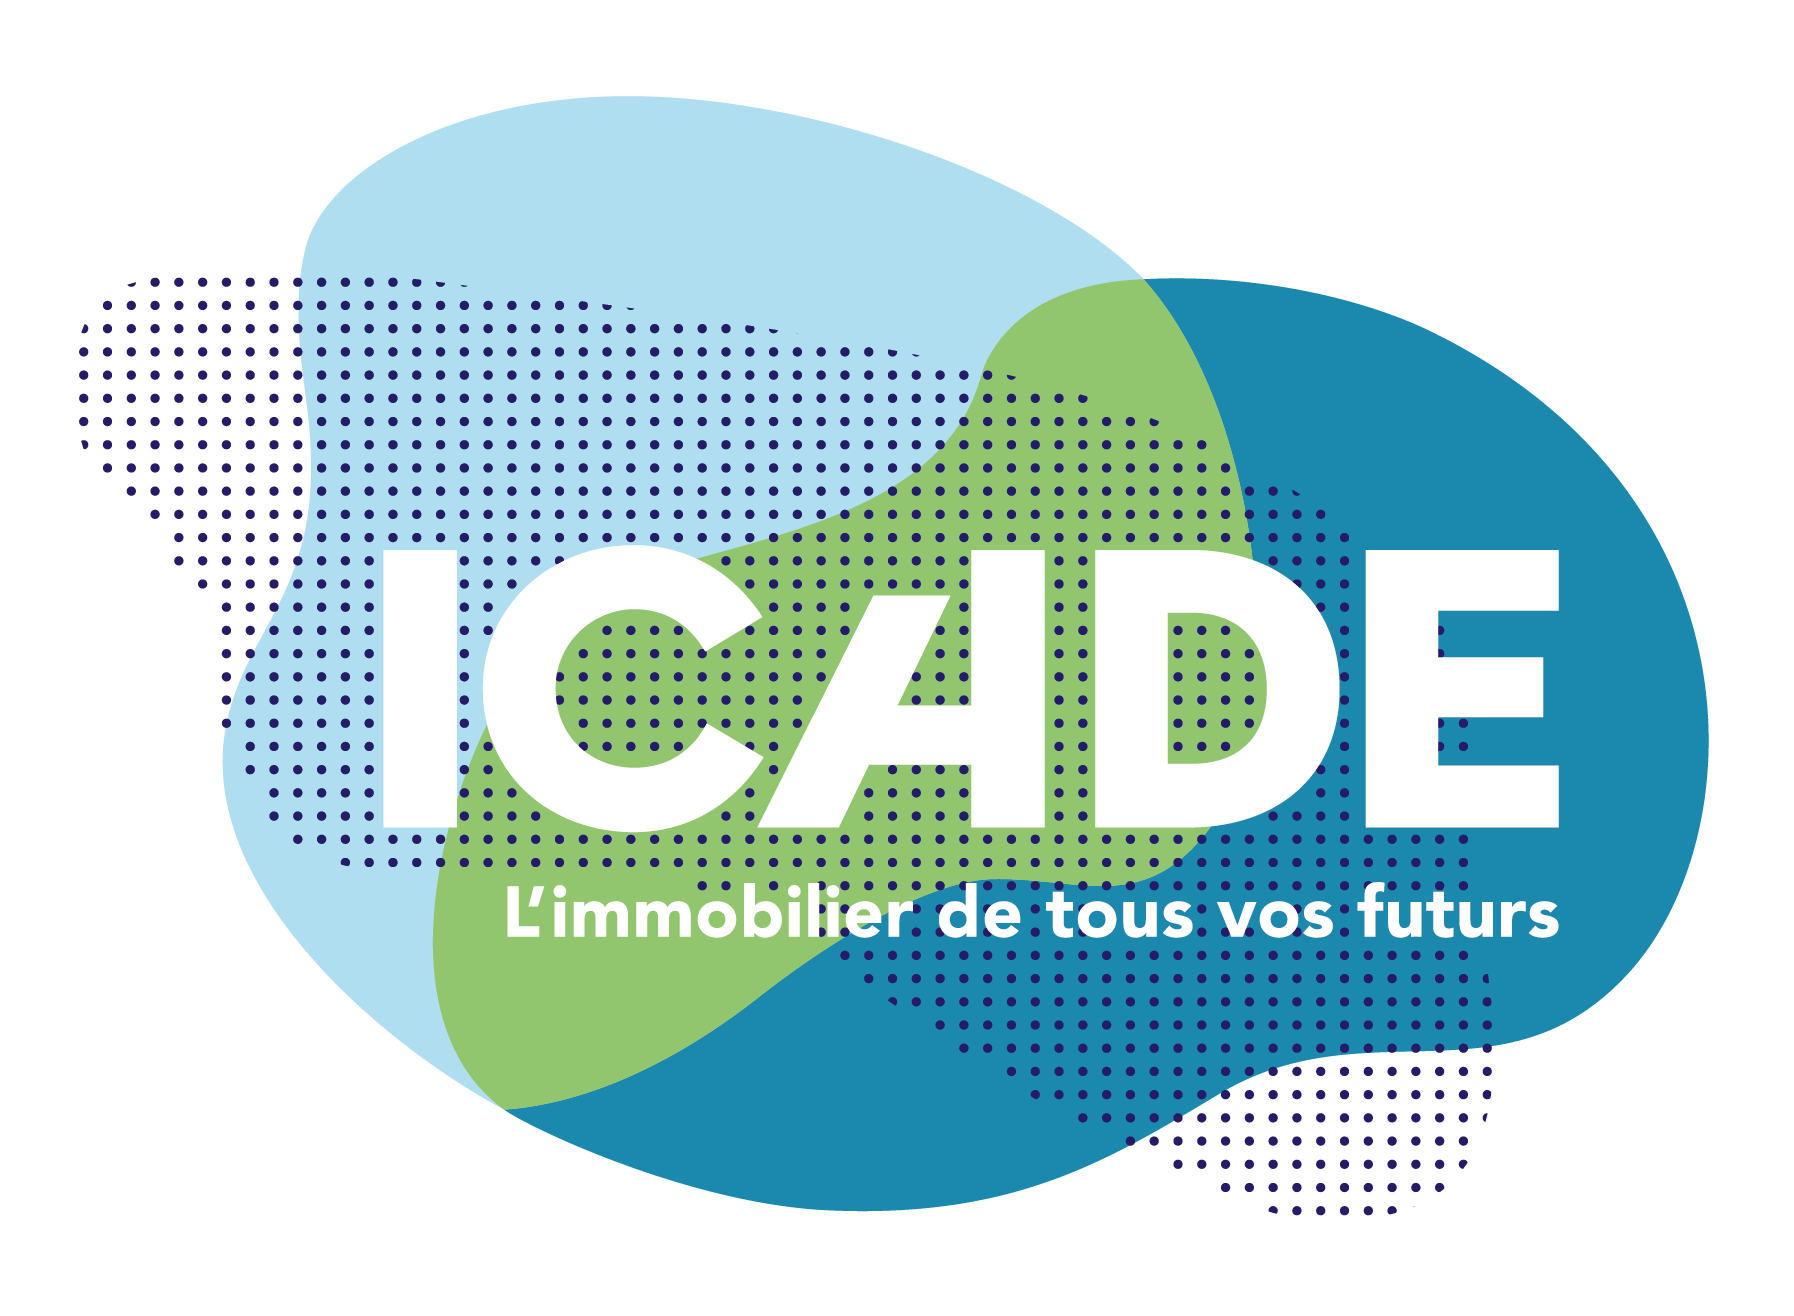 Icade - The real estate of all your futurs